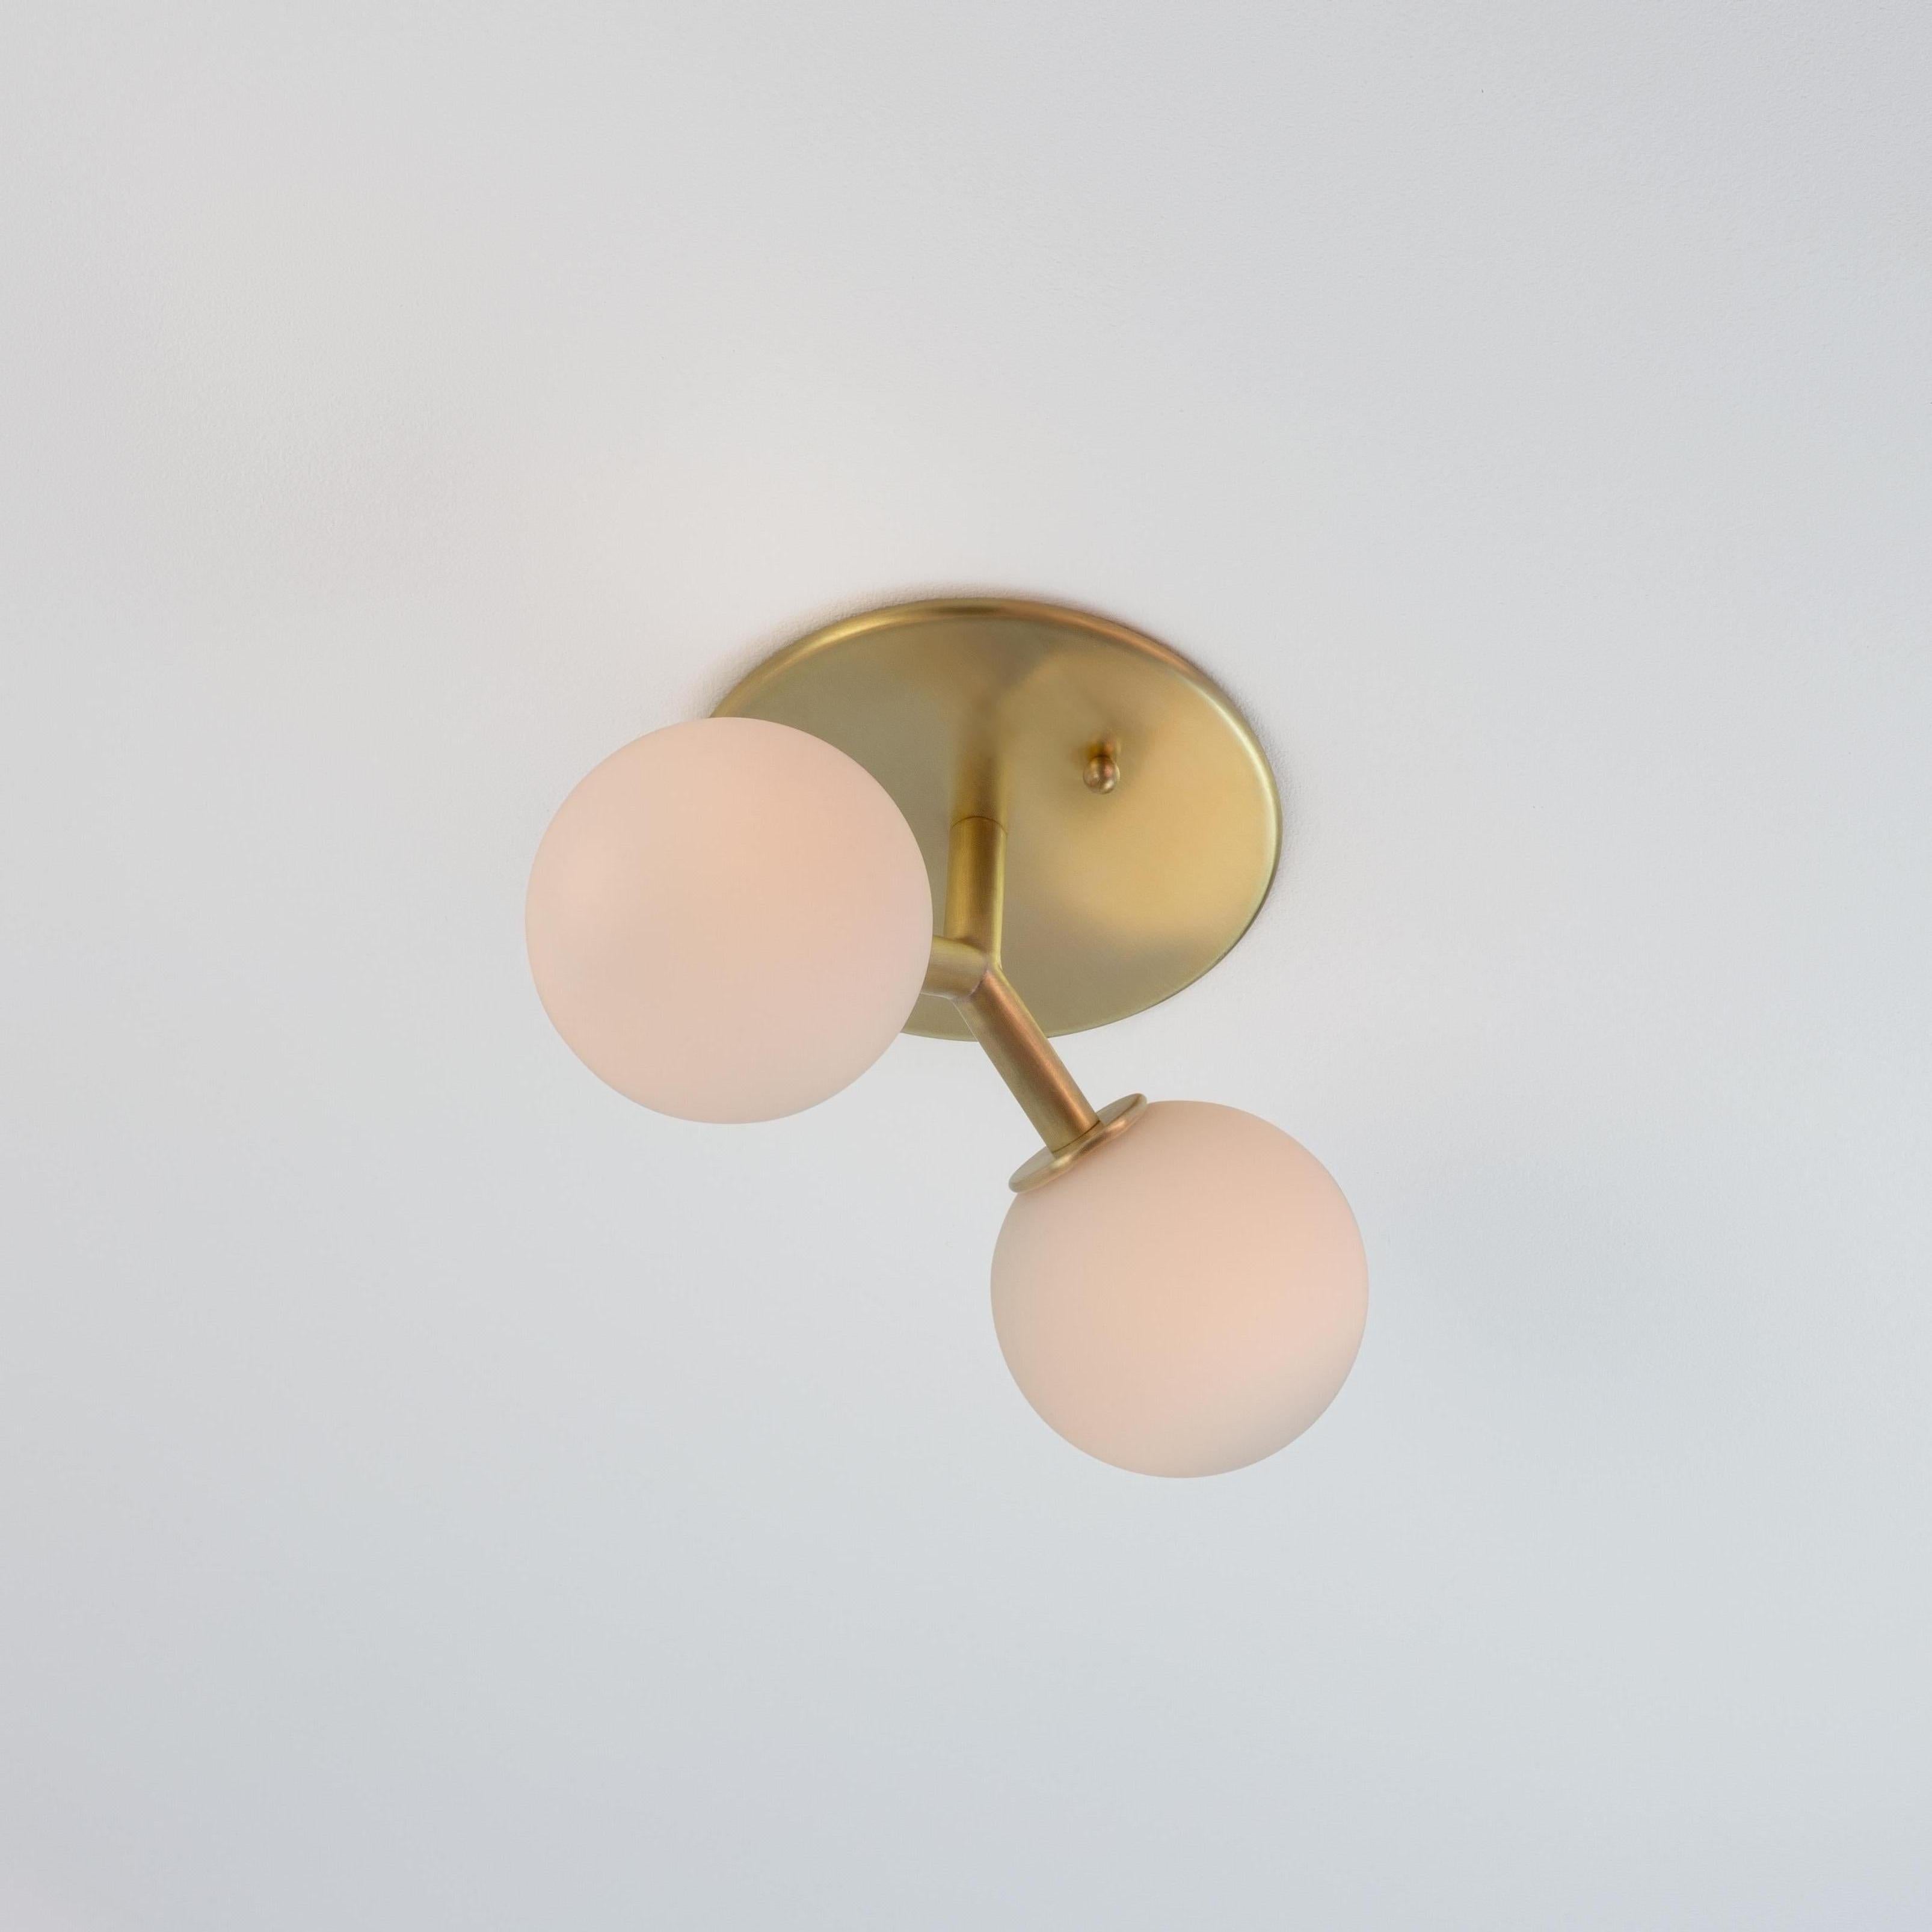 This listing is for 4x Y Flush Mount in Brass designed and manufactured by Research Lighting.

Materials: Brass & Glass
Finish: Raw Brushed Brass 
Electronics (per fixture): 2x G9 Sockets, 2x 2.5 Watt LED Bulbs (included), 500 Lumens total (per